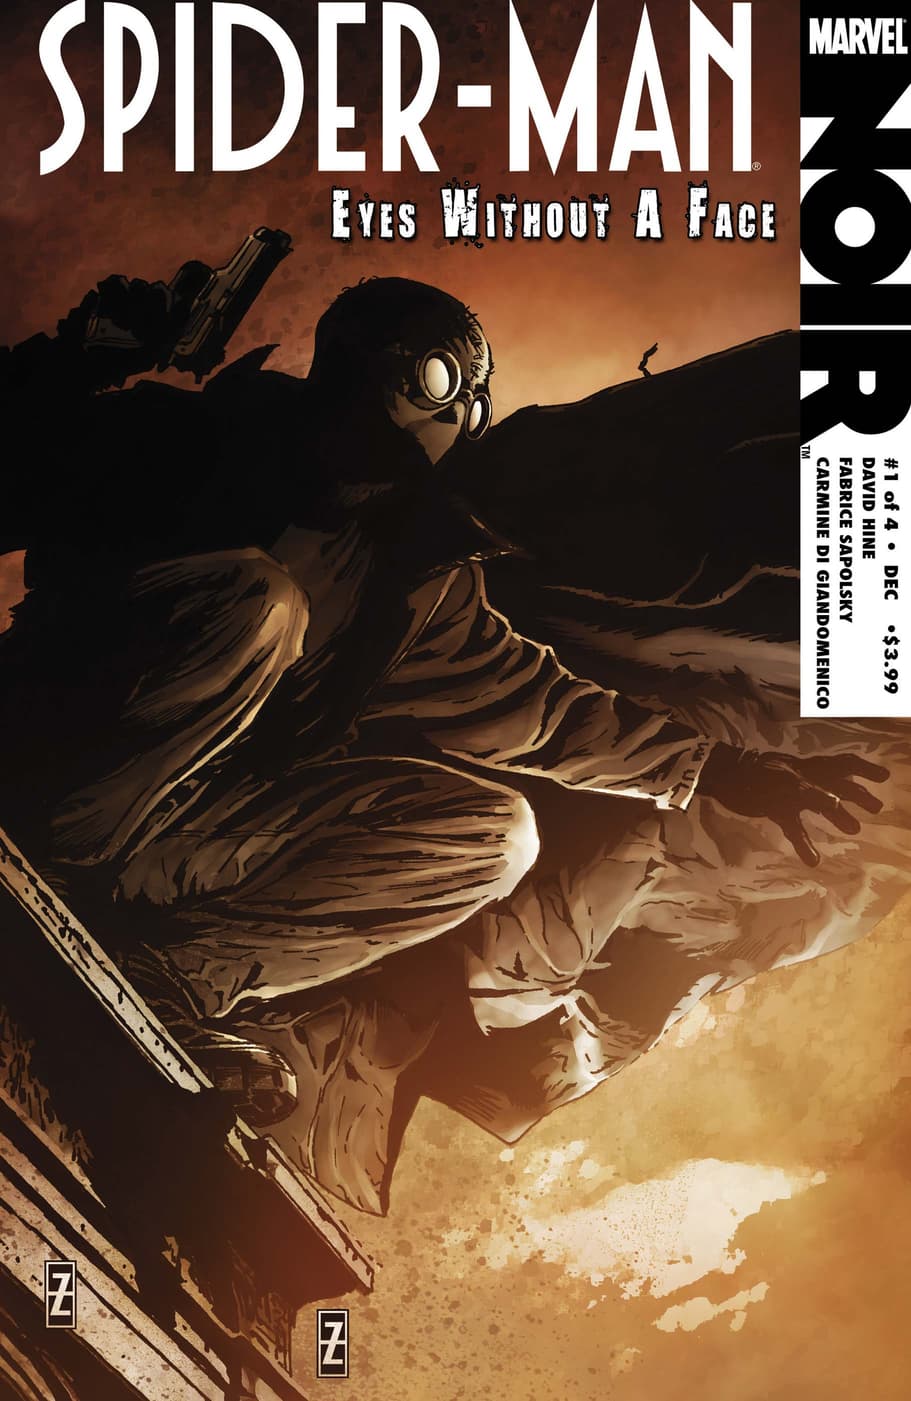 SPIDER-MAN NOIR: EYES WITHOUT A FACE (2009) #1